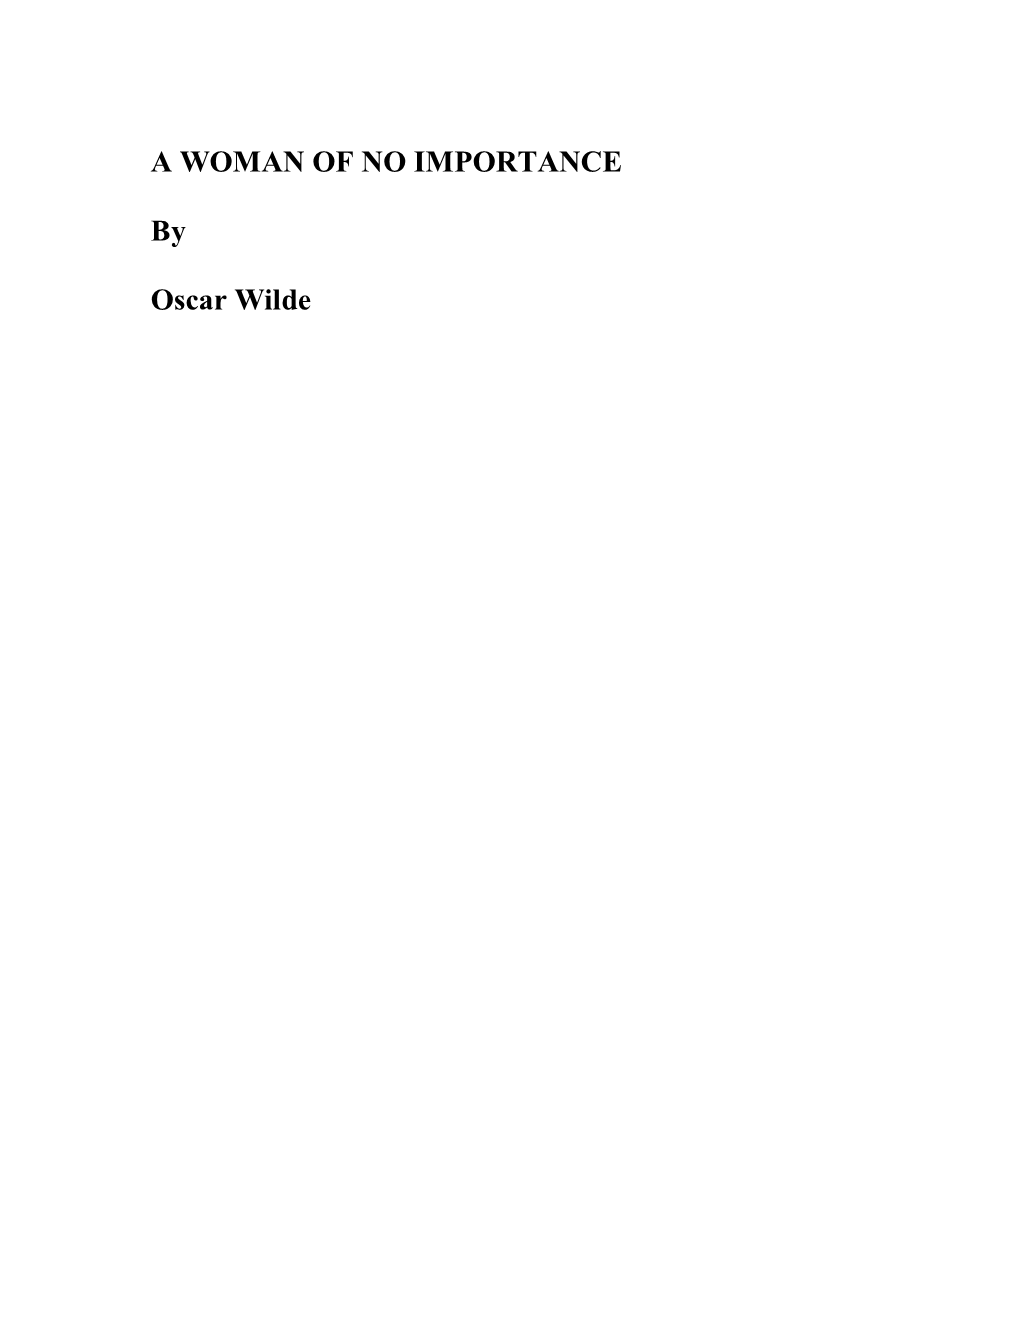 A WOMAN of NO IMPORTANCE by Oscar Wilde